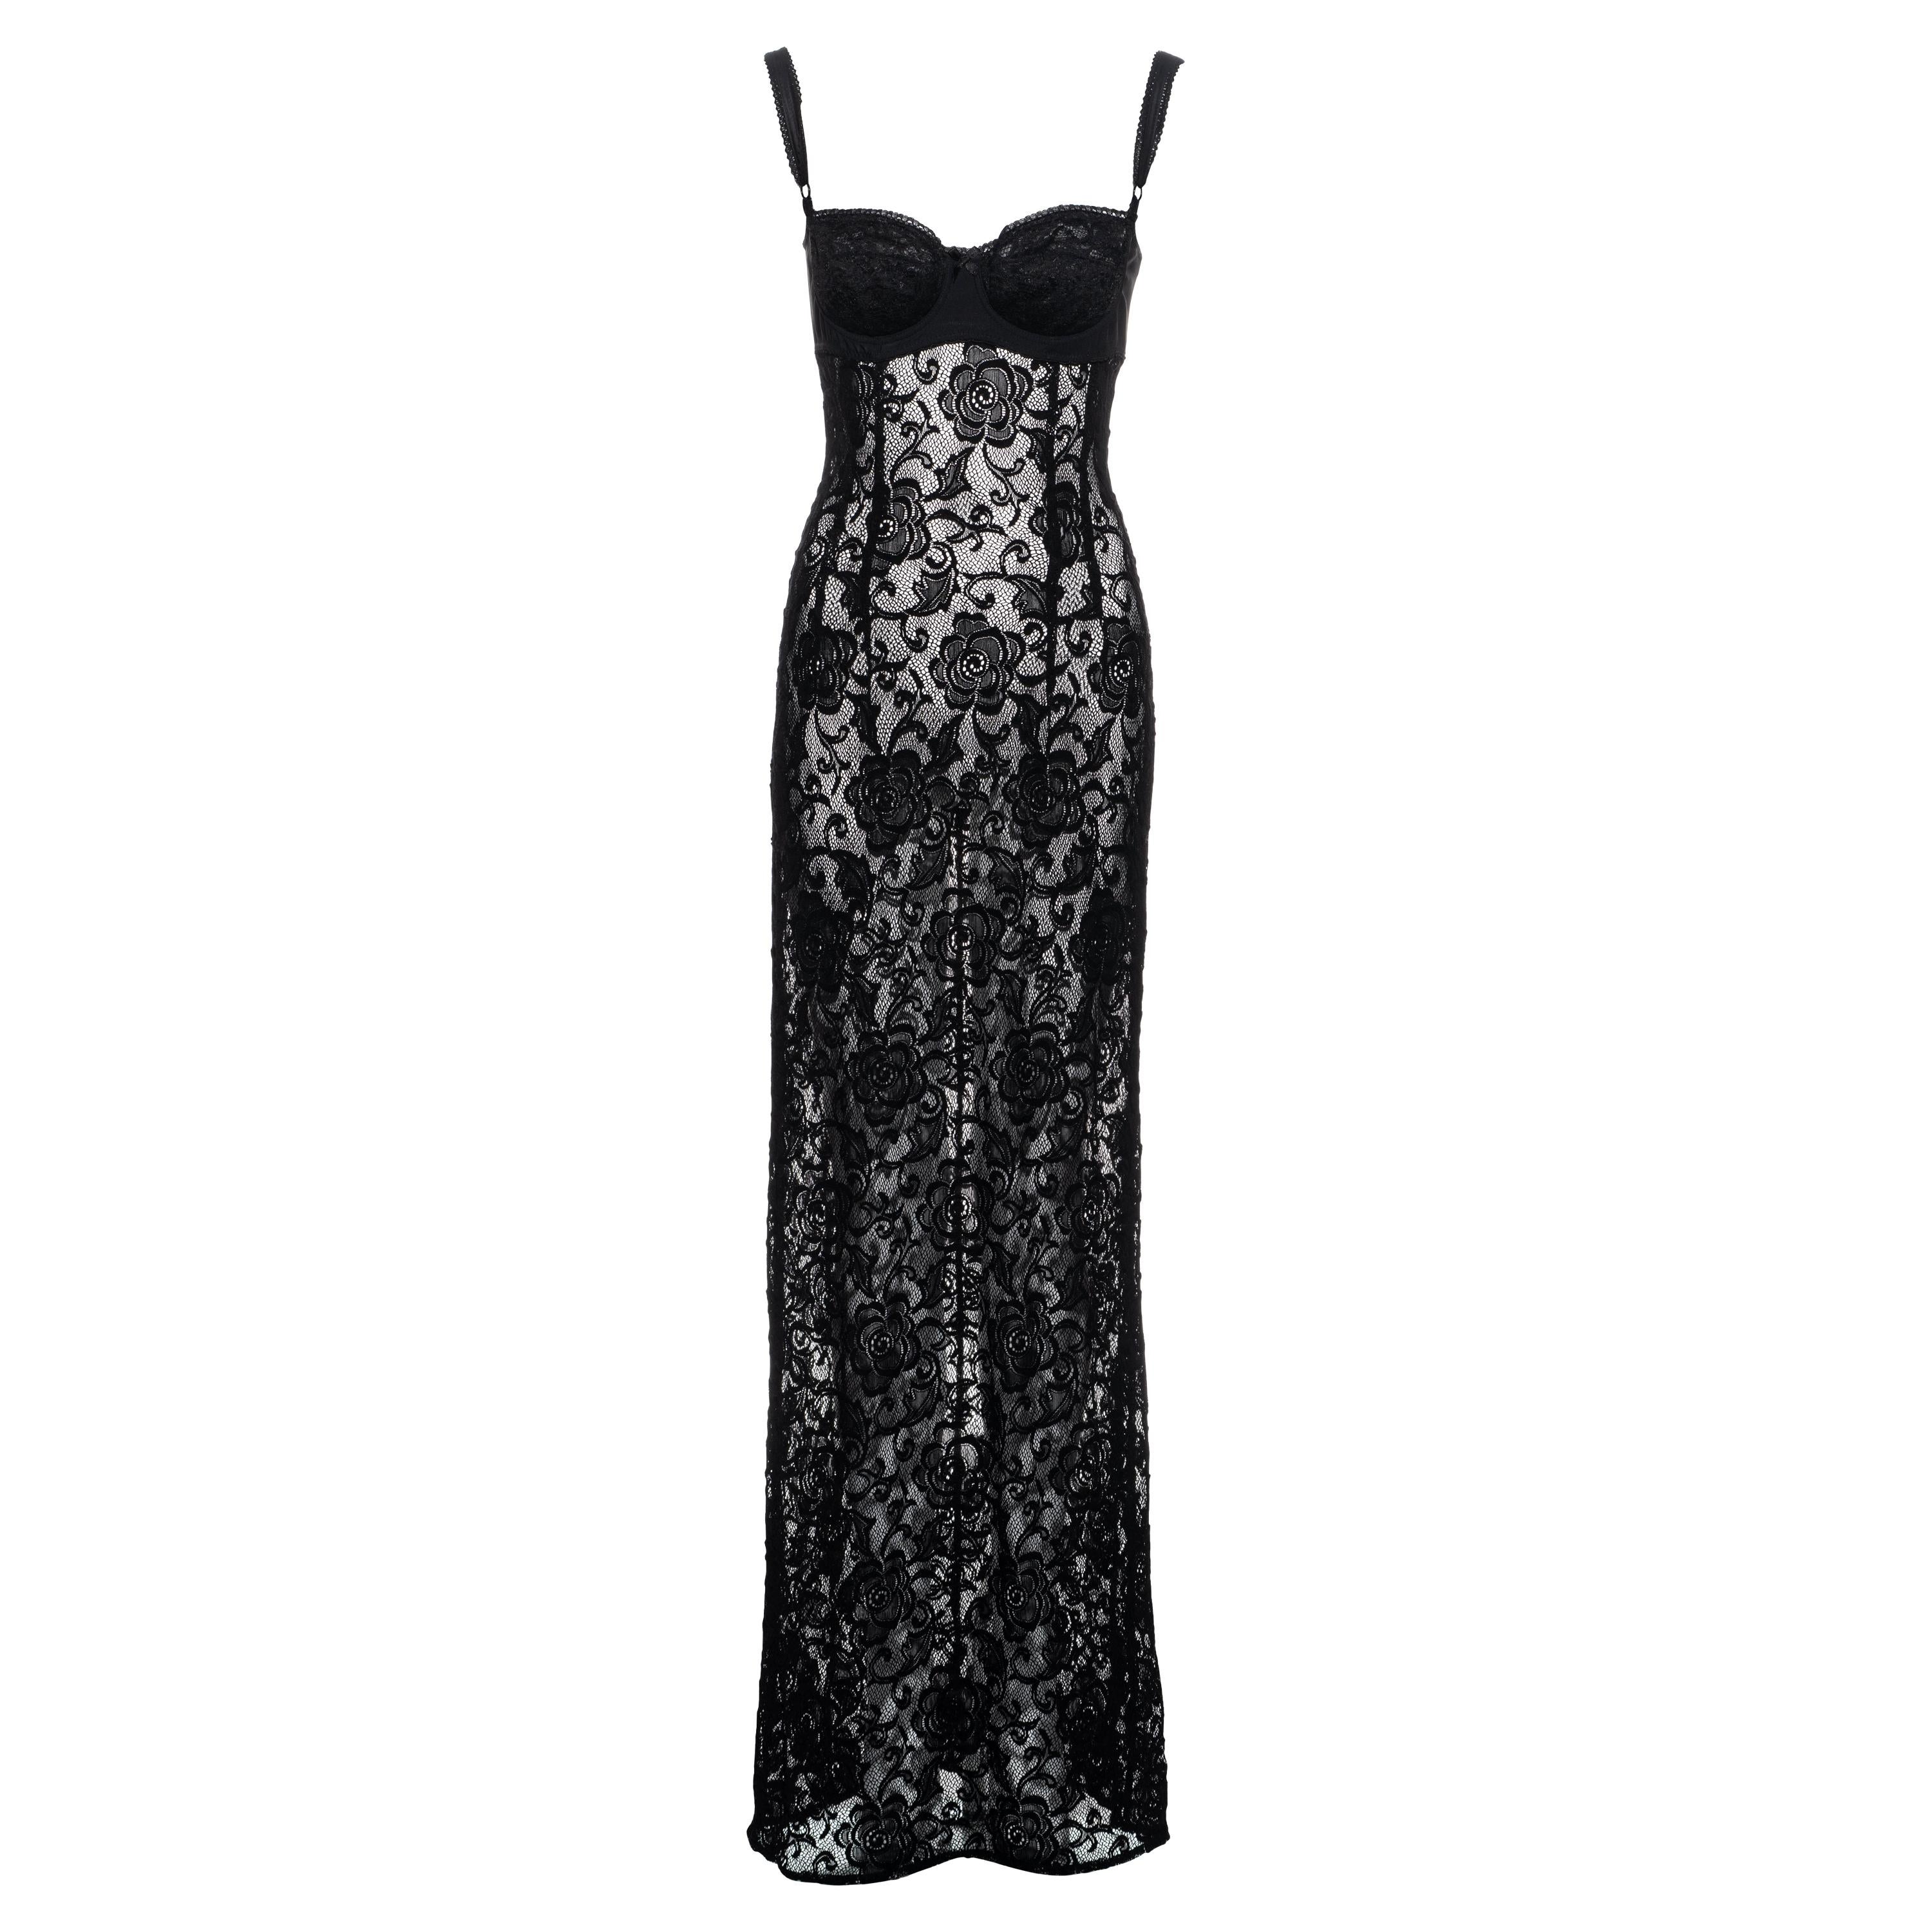 Dolce & Gabbana black lace maxi dress with attached bra, ss 1997